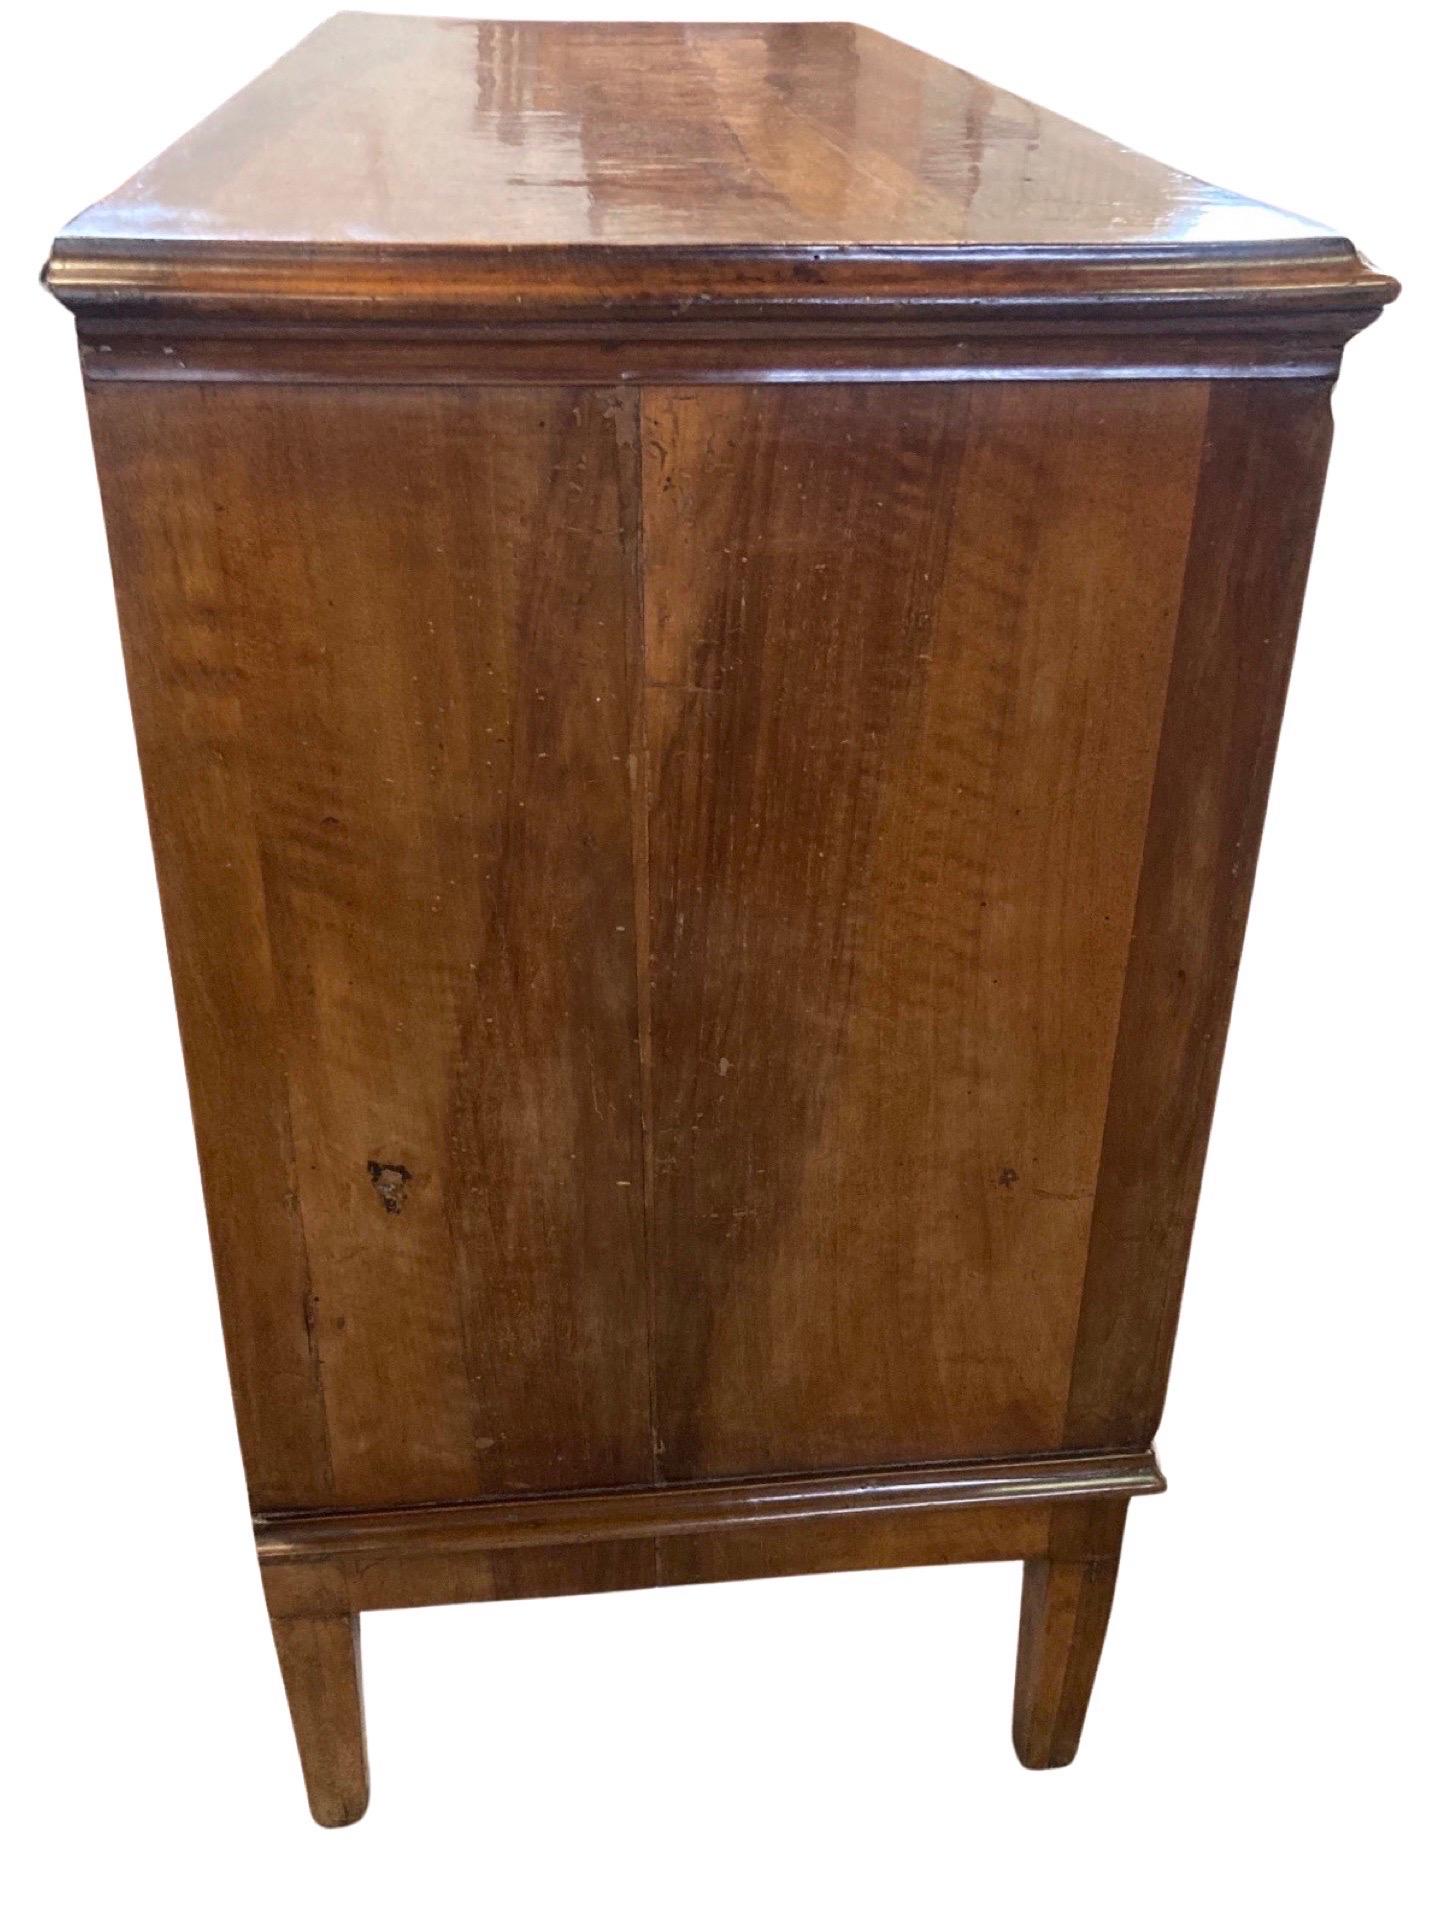 Stunning neoclassical / Louis XVI commode from central Italy hand-crafted in the mid 1700s using walnut and pegged construction. I, personally, fell in love when I saw it the first time because it is just a little different from every other commode